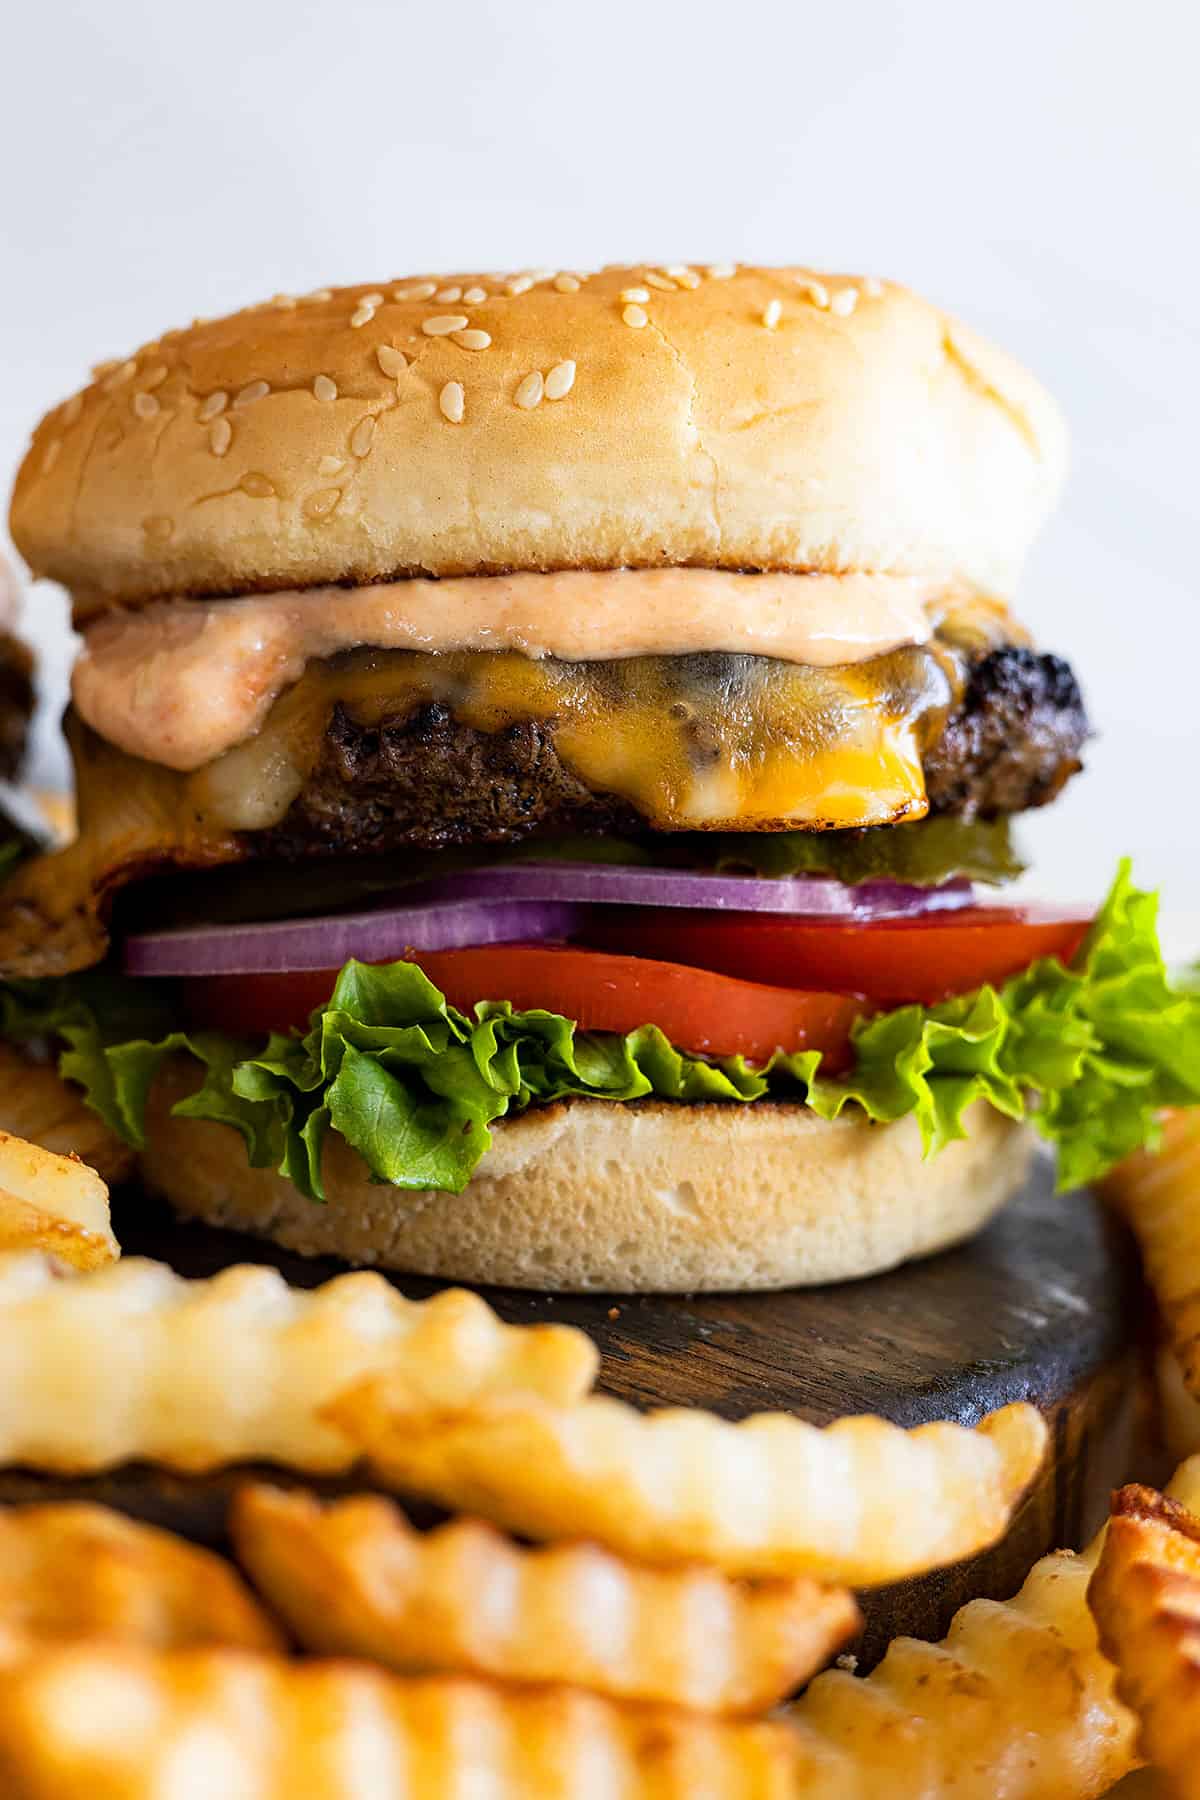 The classic burger piled high with toppings and burger sauce. Fries off to the side. 